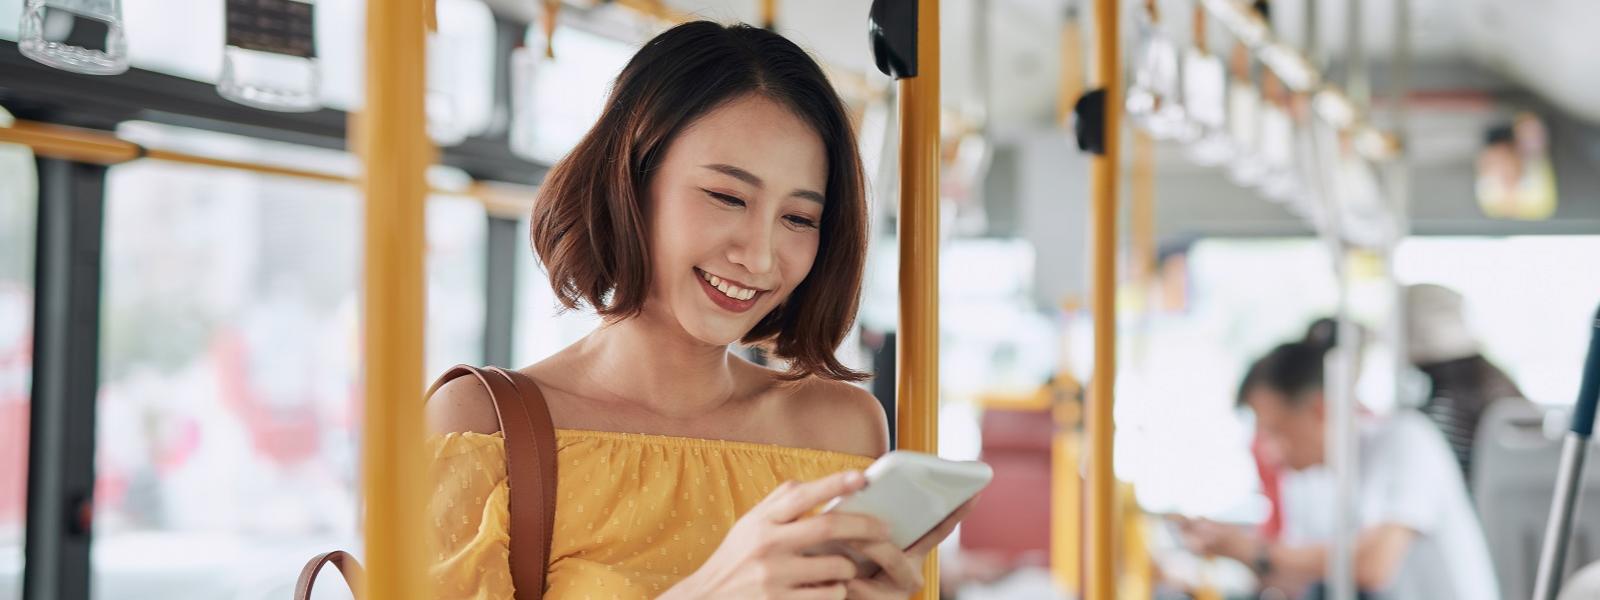 5 reasons why mobile ticketing can help you achieve your sustainability goals 